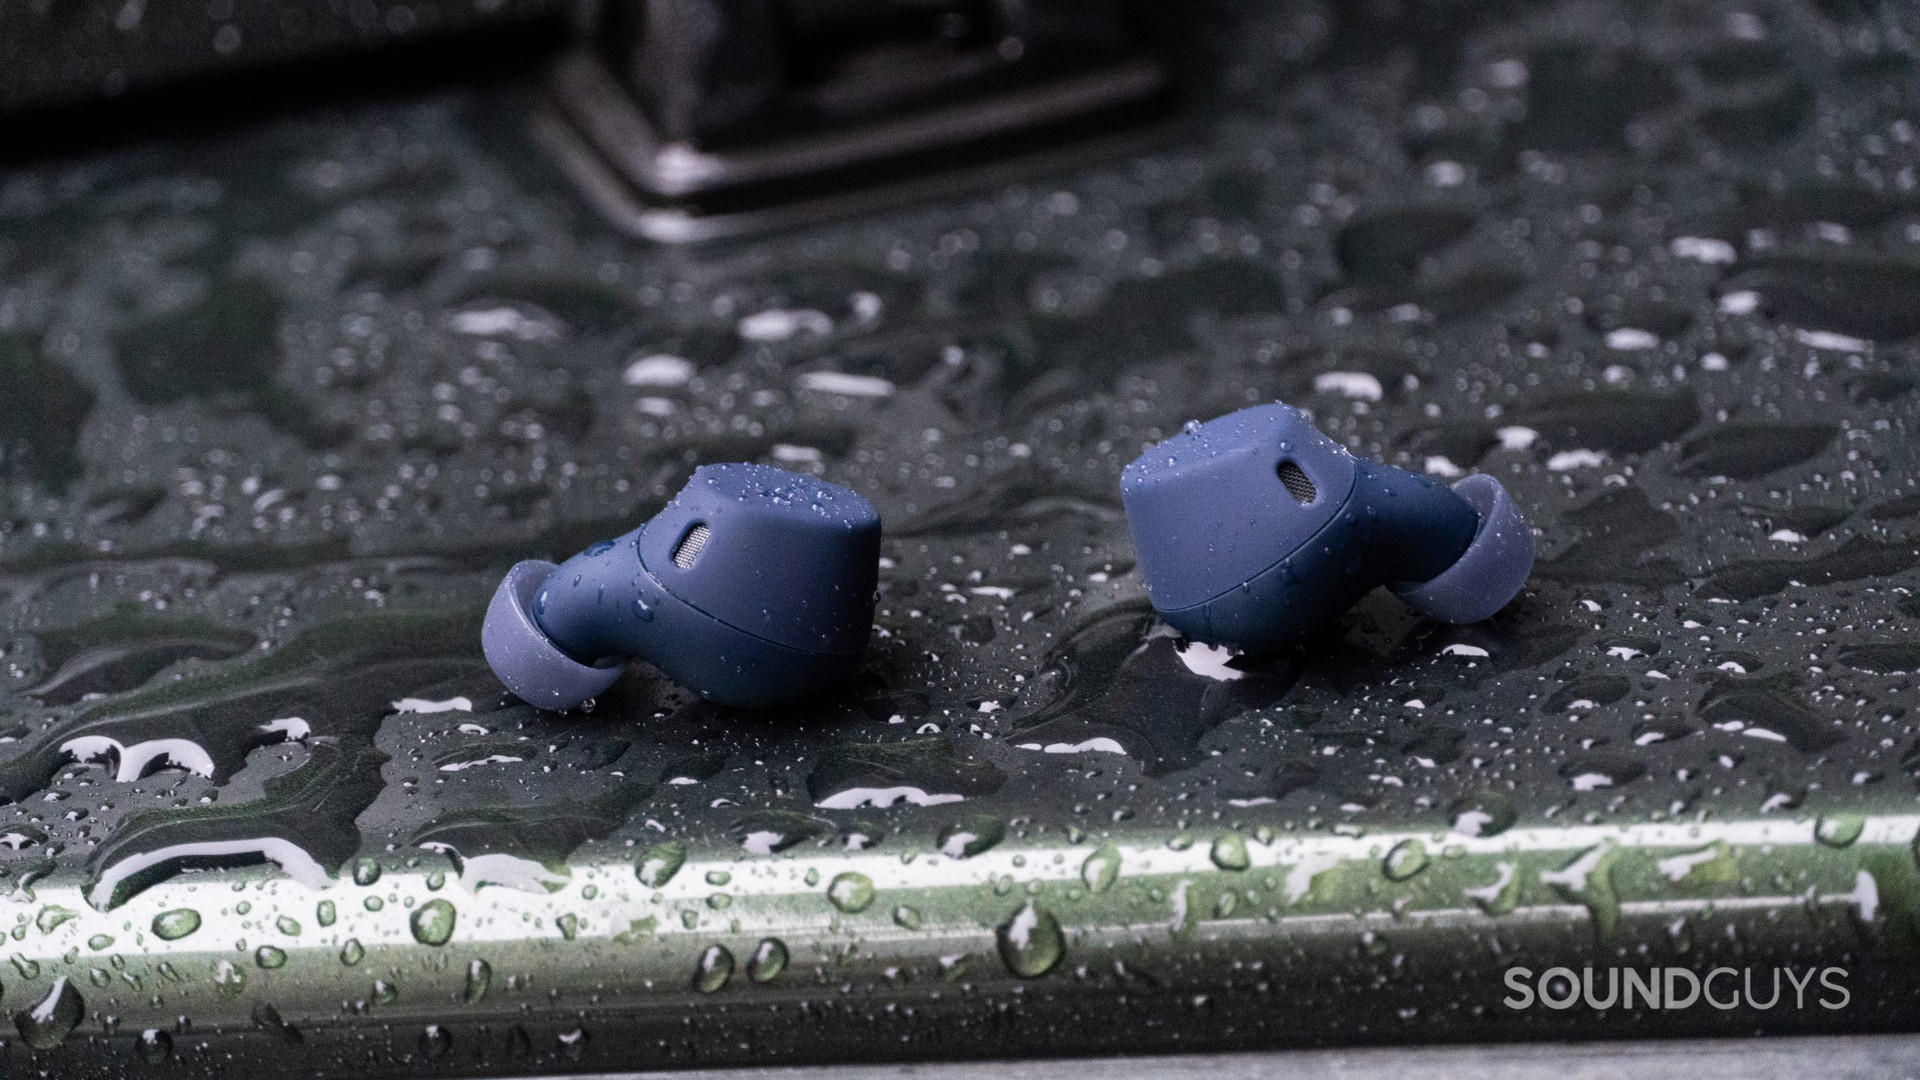 Jabra Elite 7 Active earbuds sitting on a rain-covered surface.